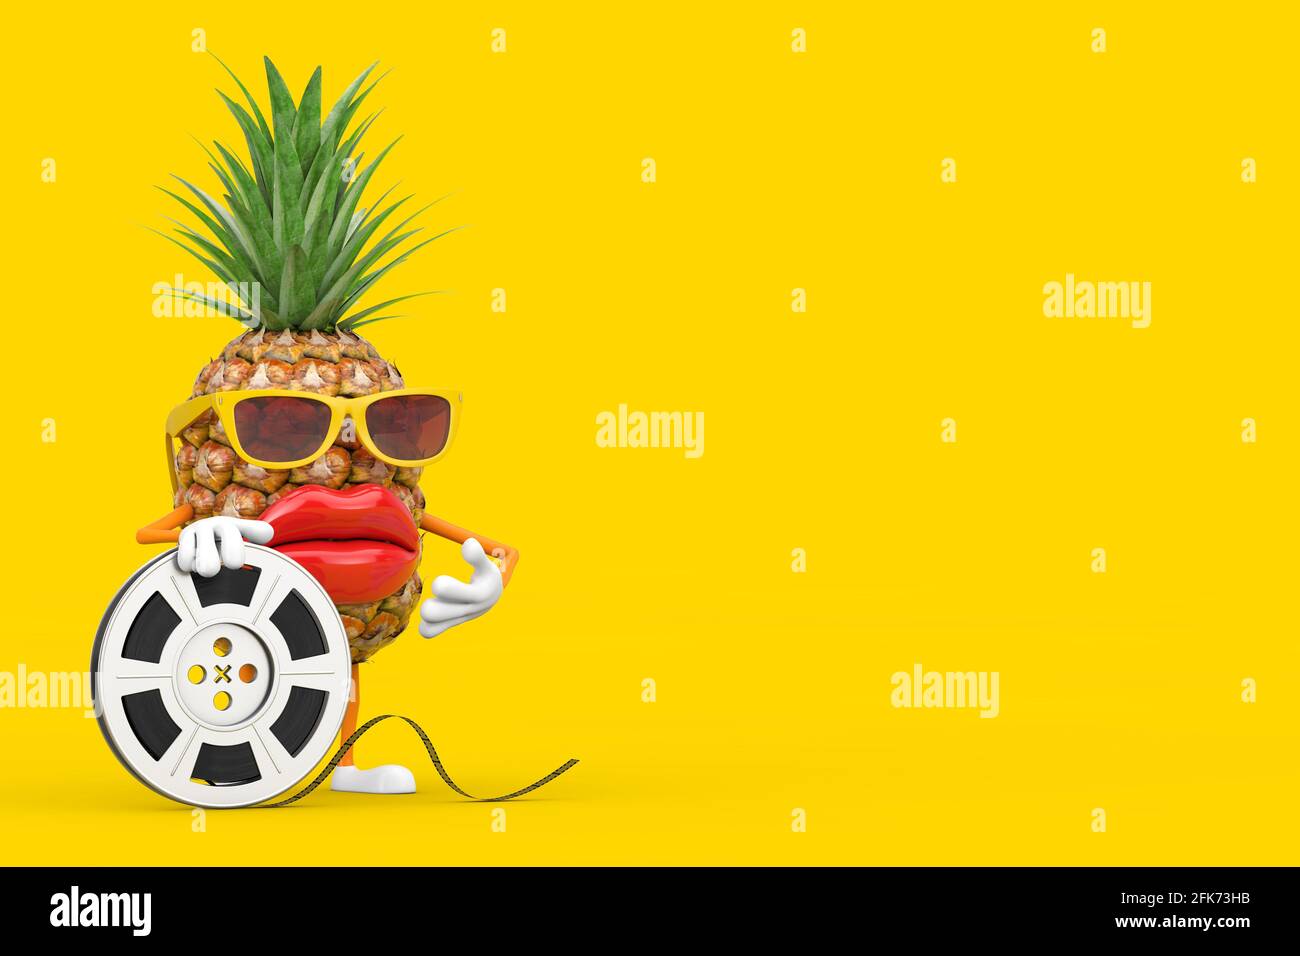 Fun Cartoon Fashion Hipster Cut Pineapple Person Character Mascot with Film Reel Cinema Tape on a yellow background. 3d Rendering Stock Photo